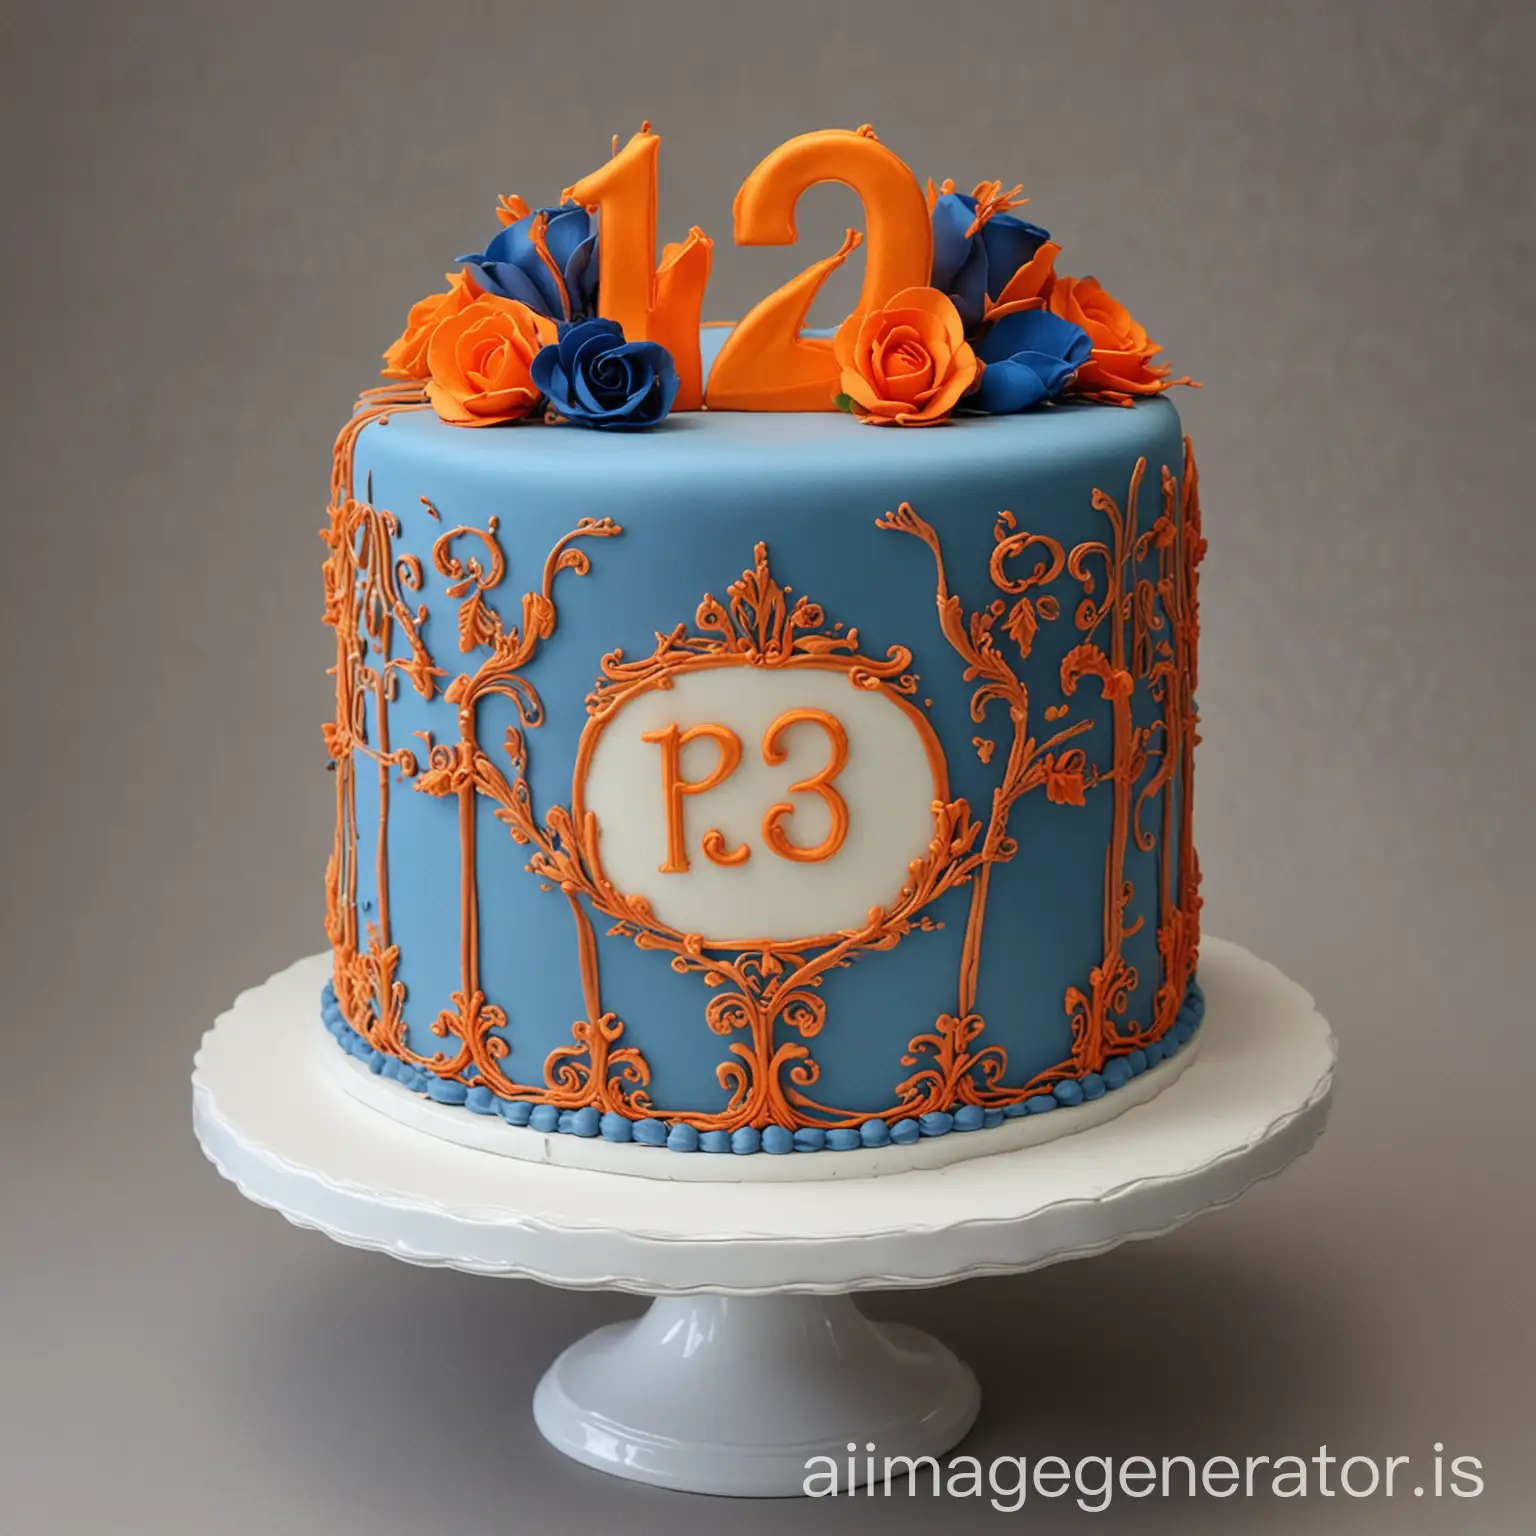 Elegantly decorated 122nd anniversary cake for P&S. Blue and orange